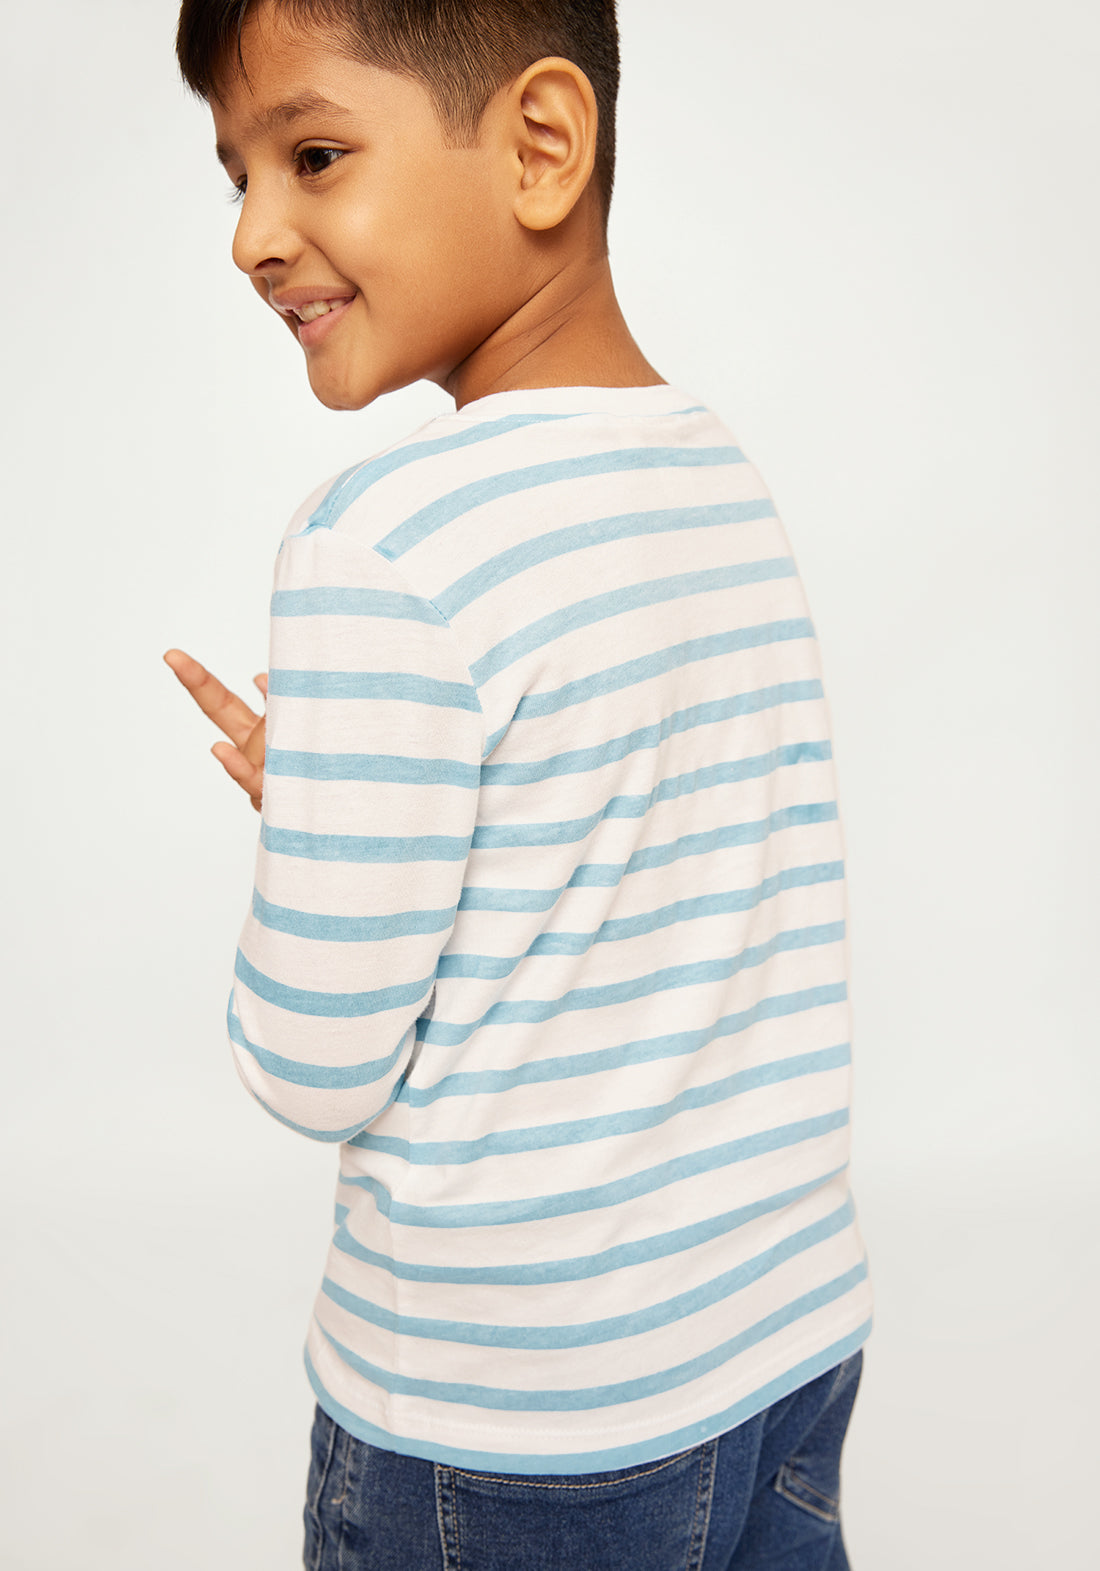 AQUA STRIPE WITH CONSTRUCTION PLACEMENT PRINT TEE